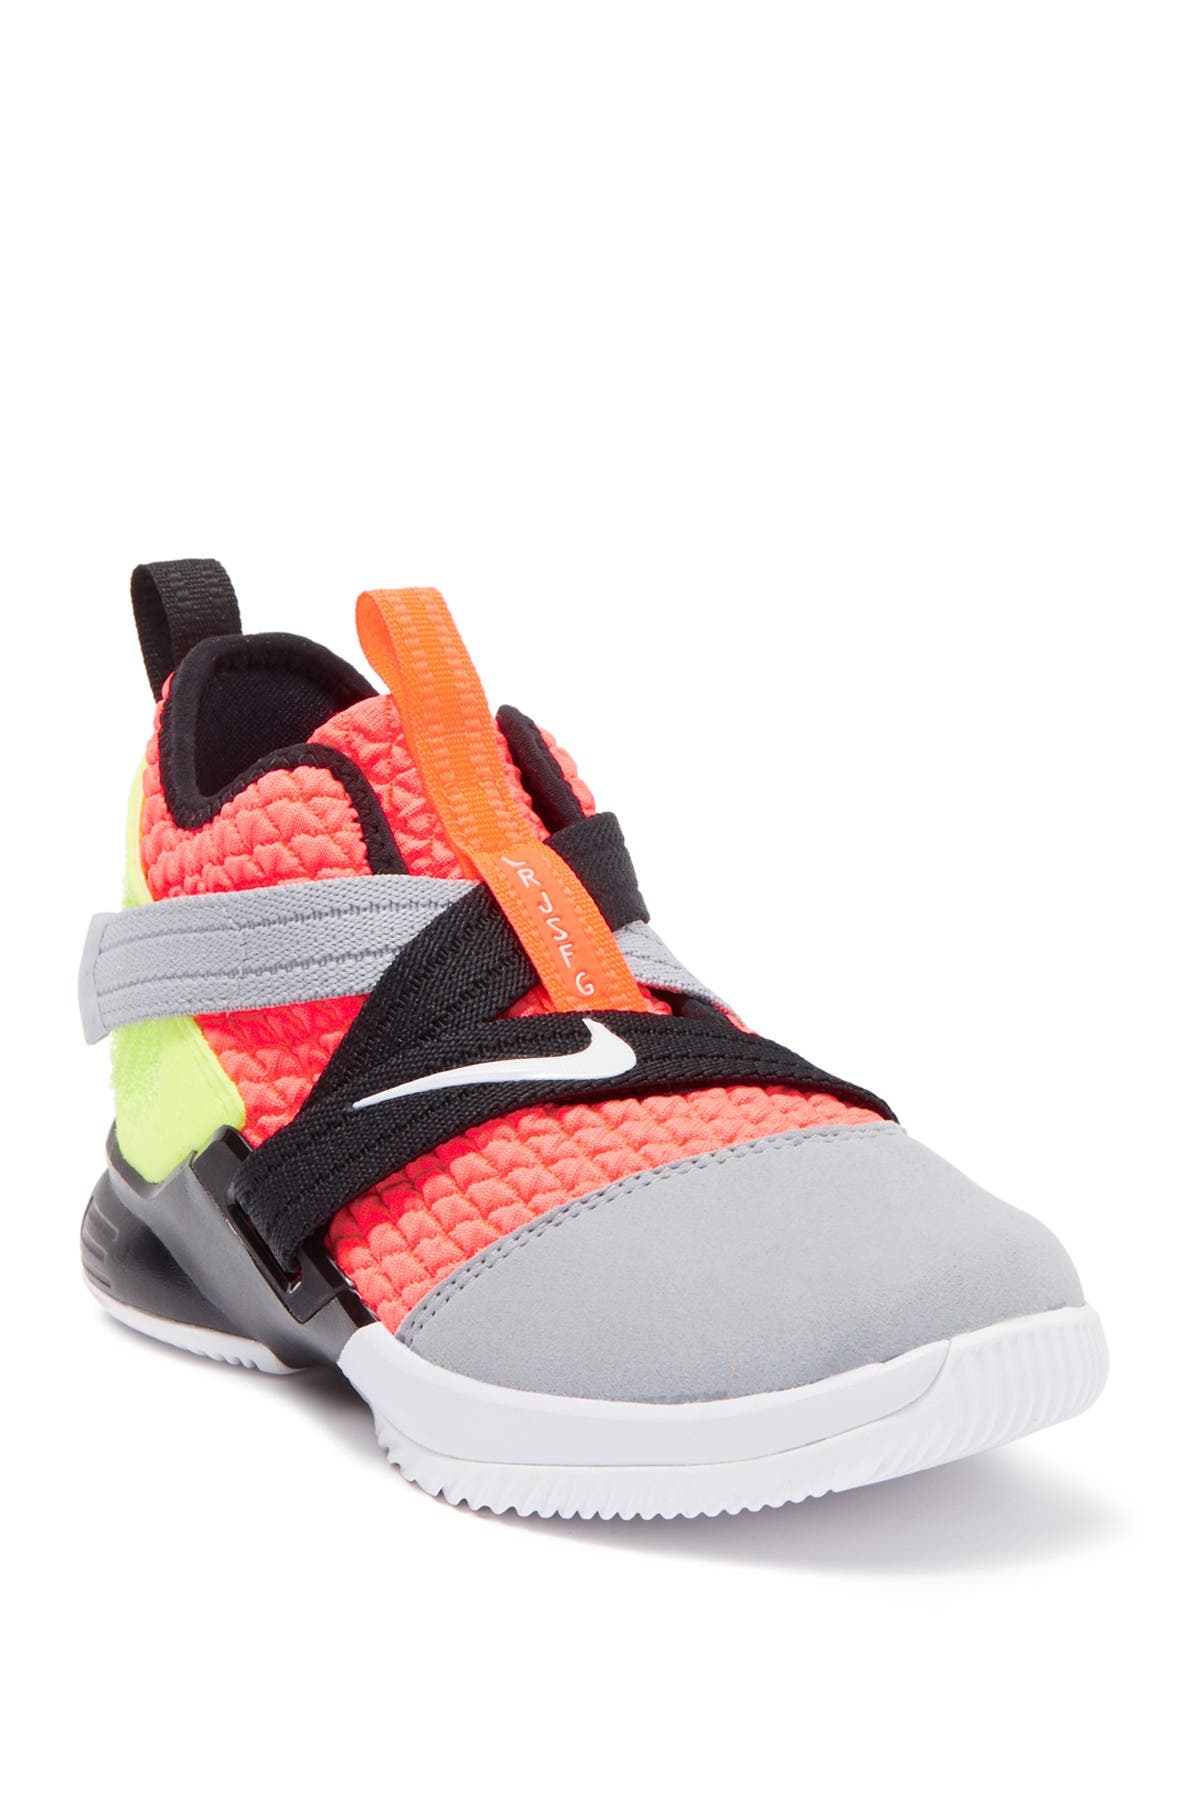 lebron soldier xii toddler